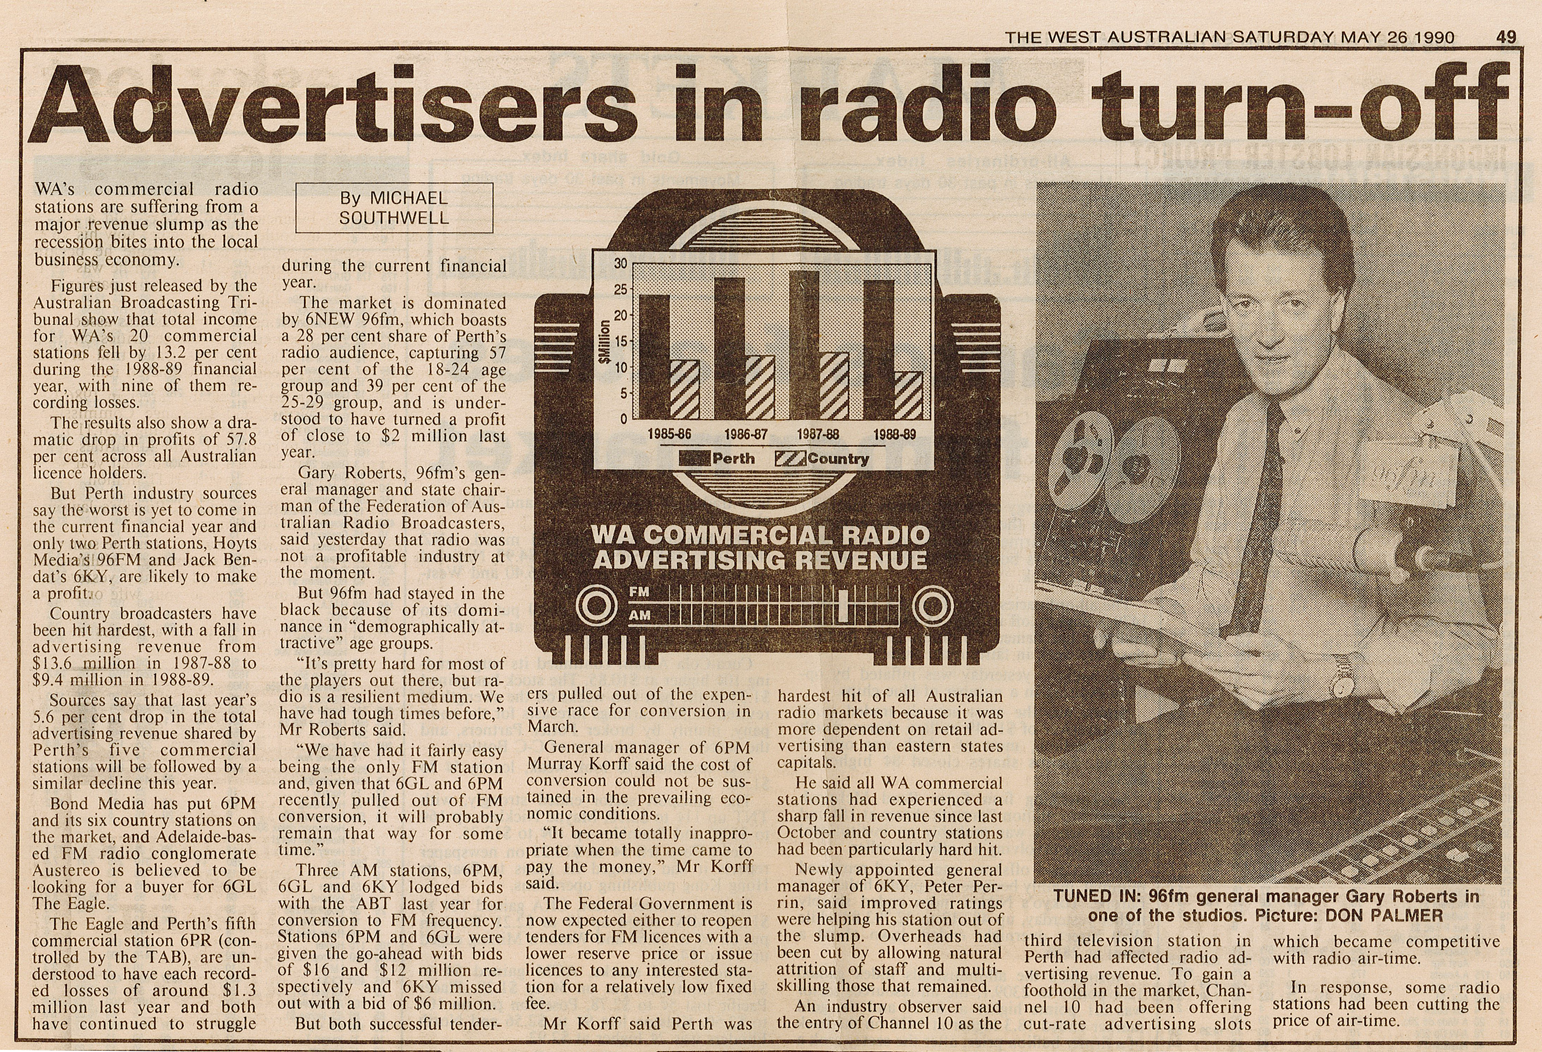 1990.05.26 - Article - Advertisers in radio turn-off - The West Australian.png